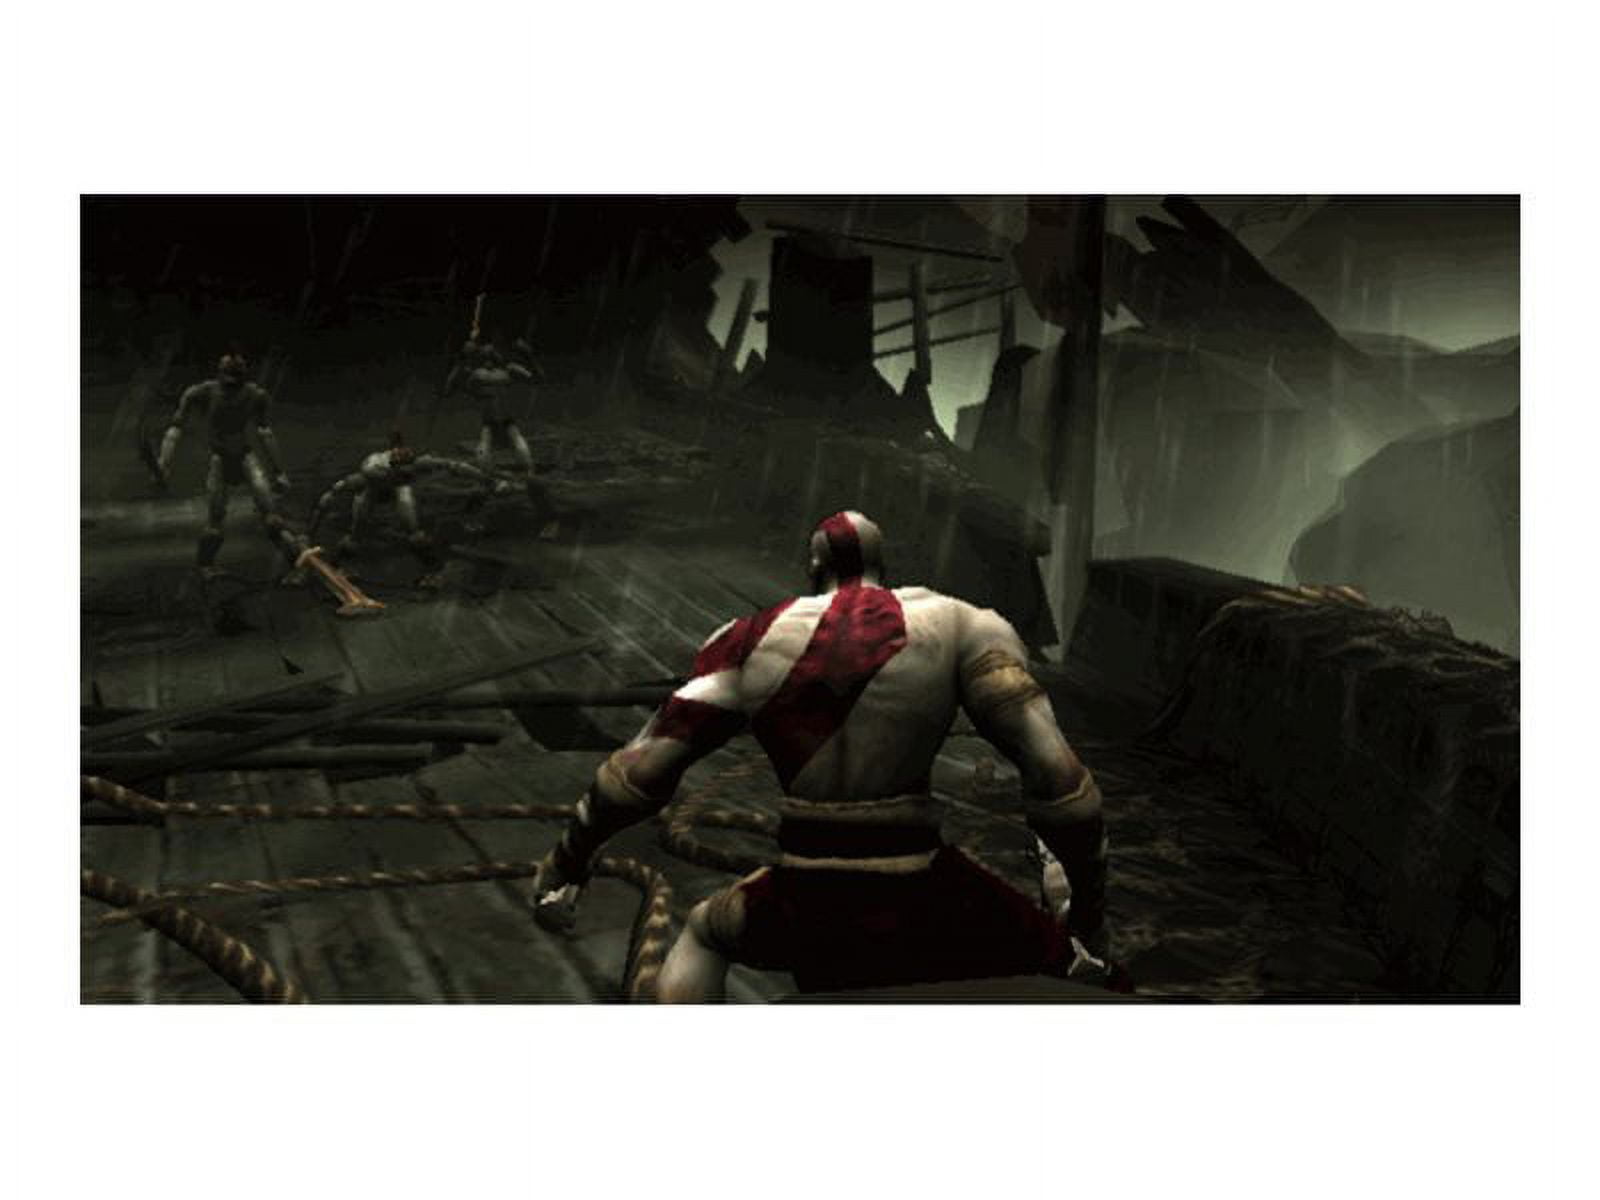 2X Gamer: ->God of War Chains of Olympus PT-BR Size Game 1,4 GB